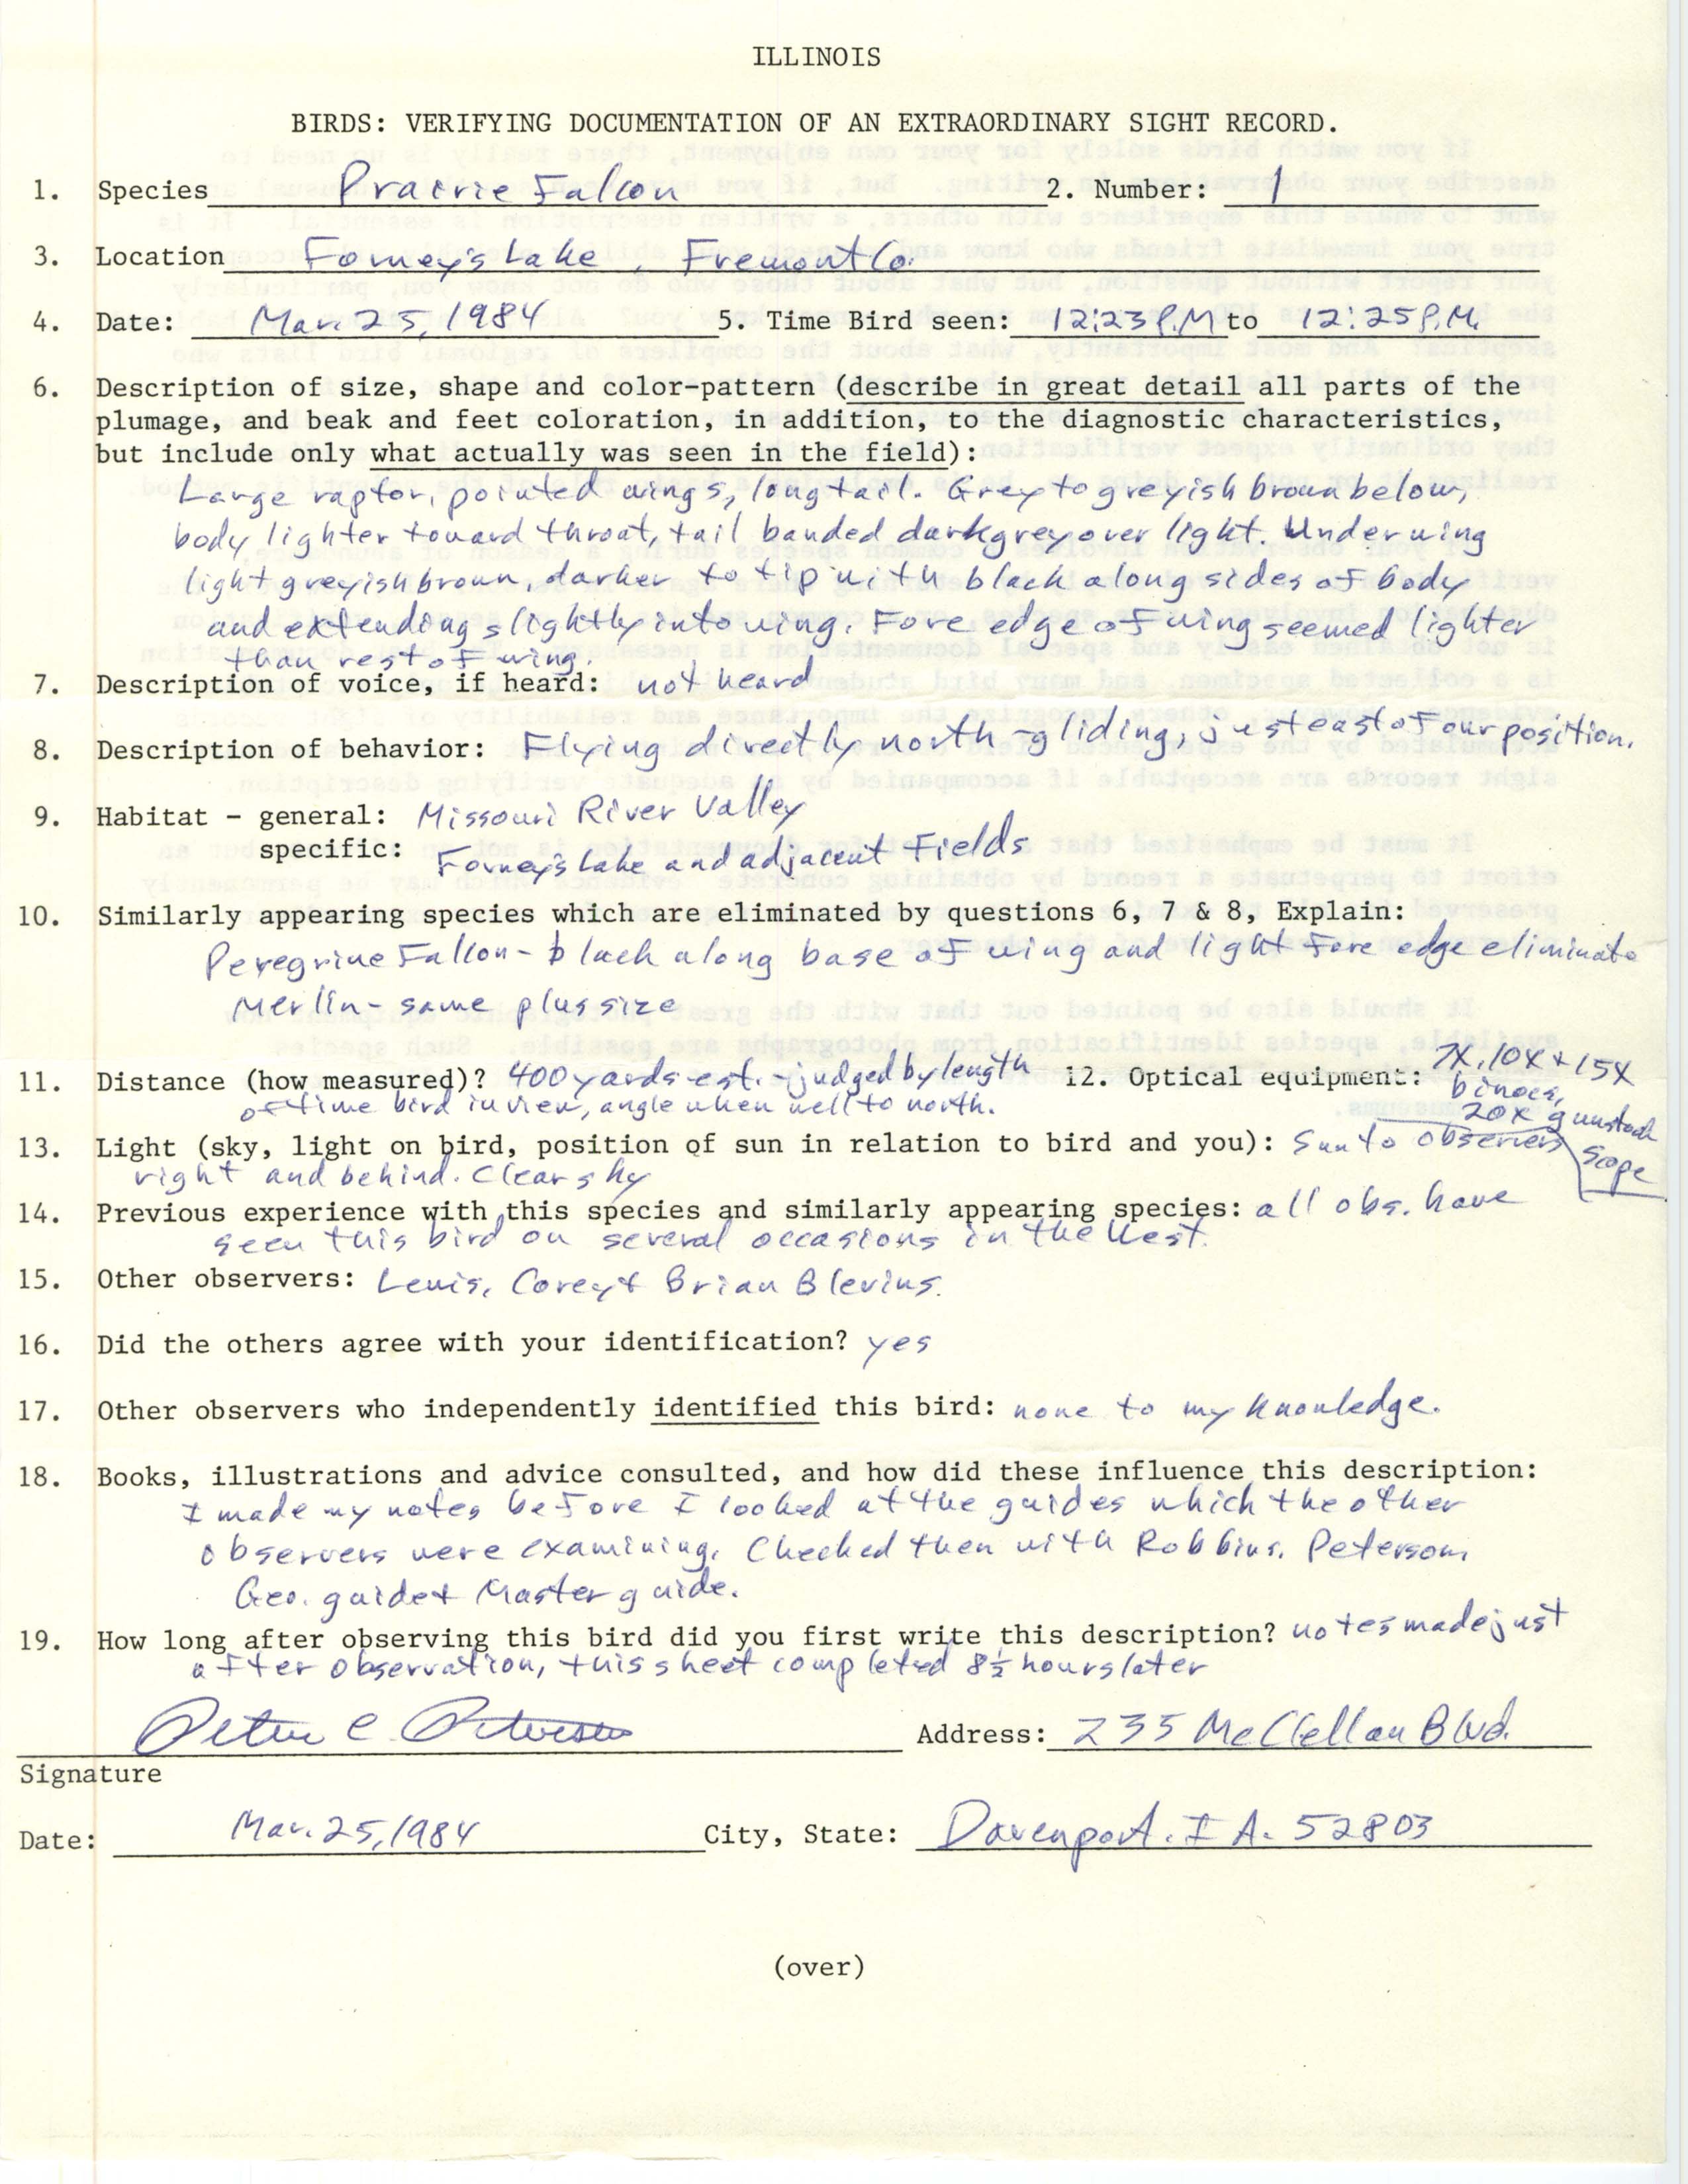 Rare bird documentation form for Prairie Falcon at Forney's Lake, 1984